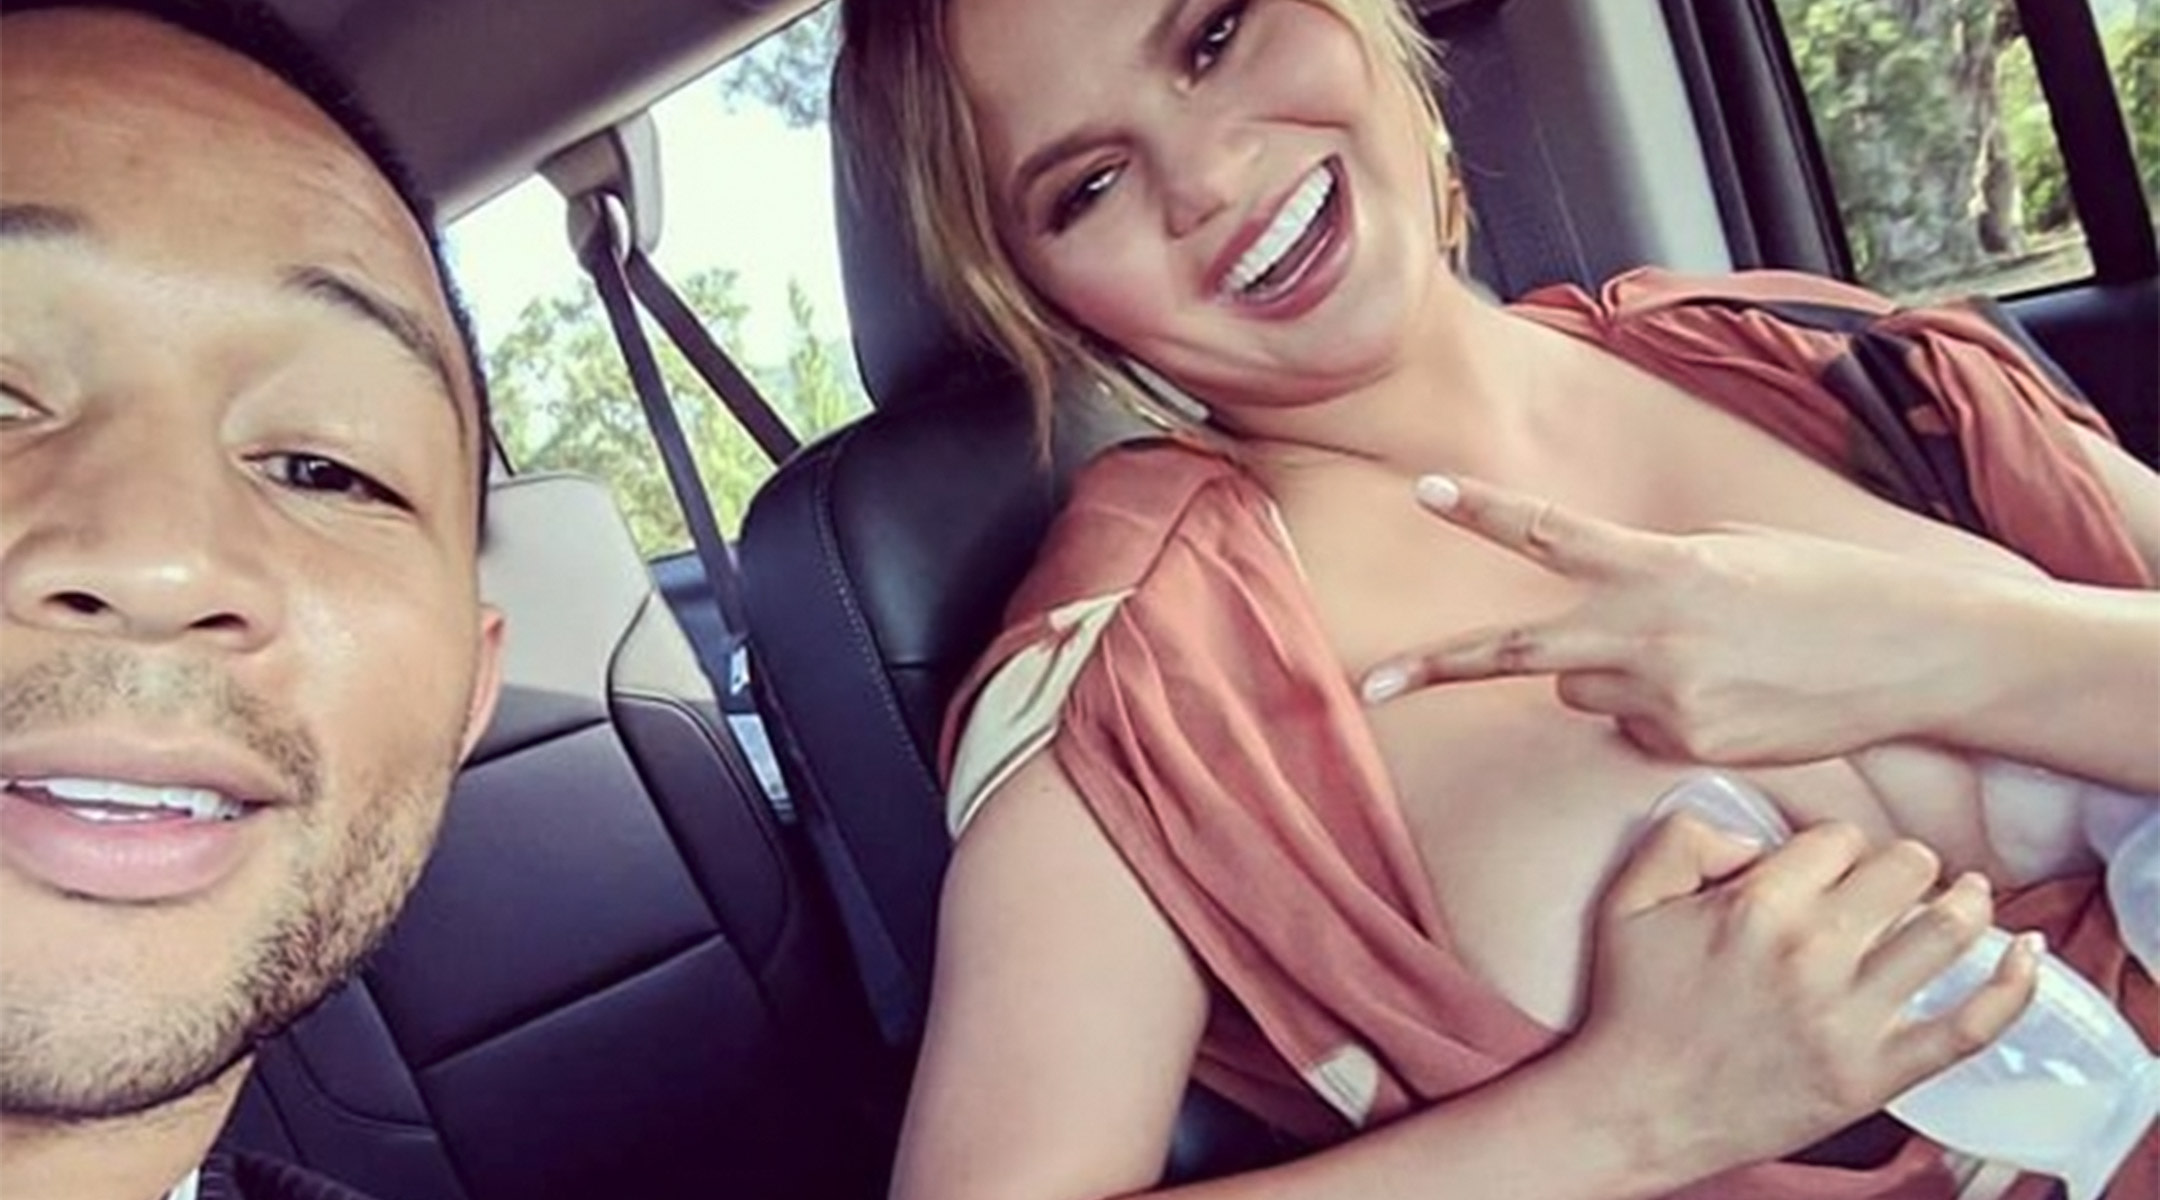 chrissy teigen pumping on fathers day date with john legend